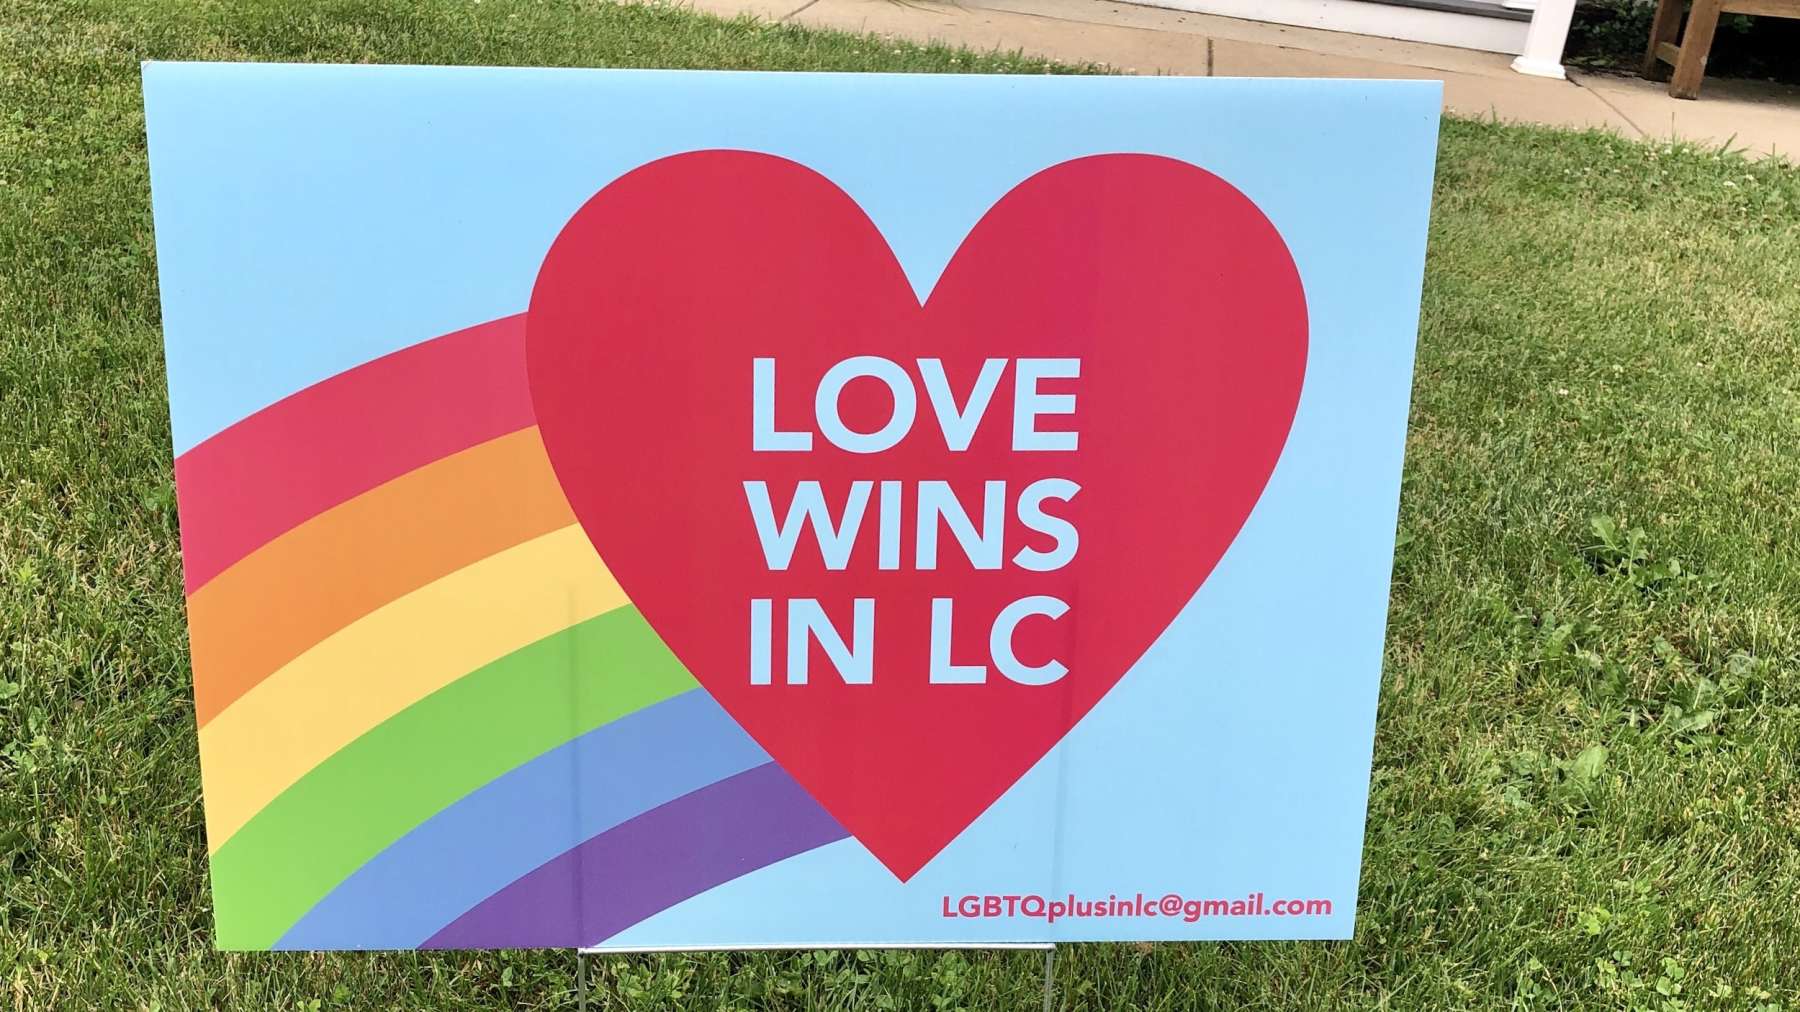 RI Queer PAC: Little Compton Town Council shows it’s conservative colors